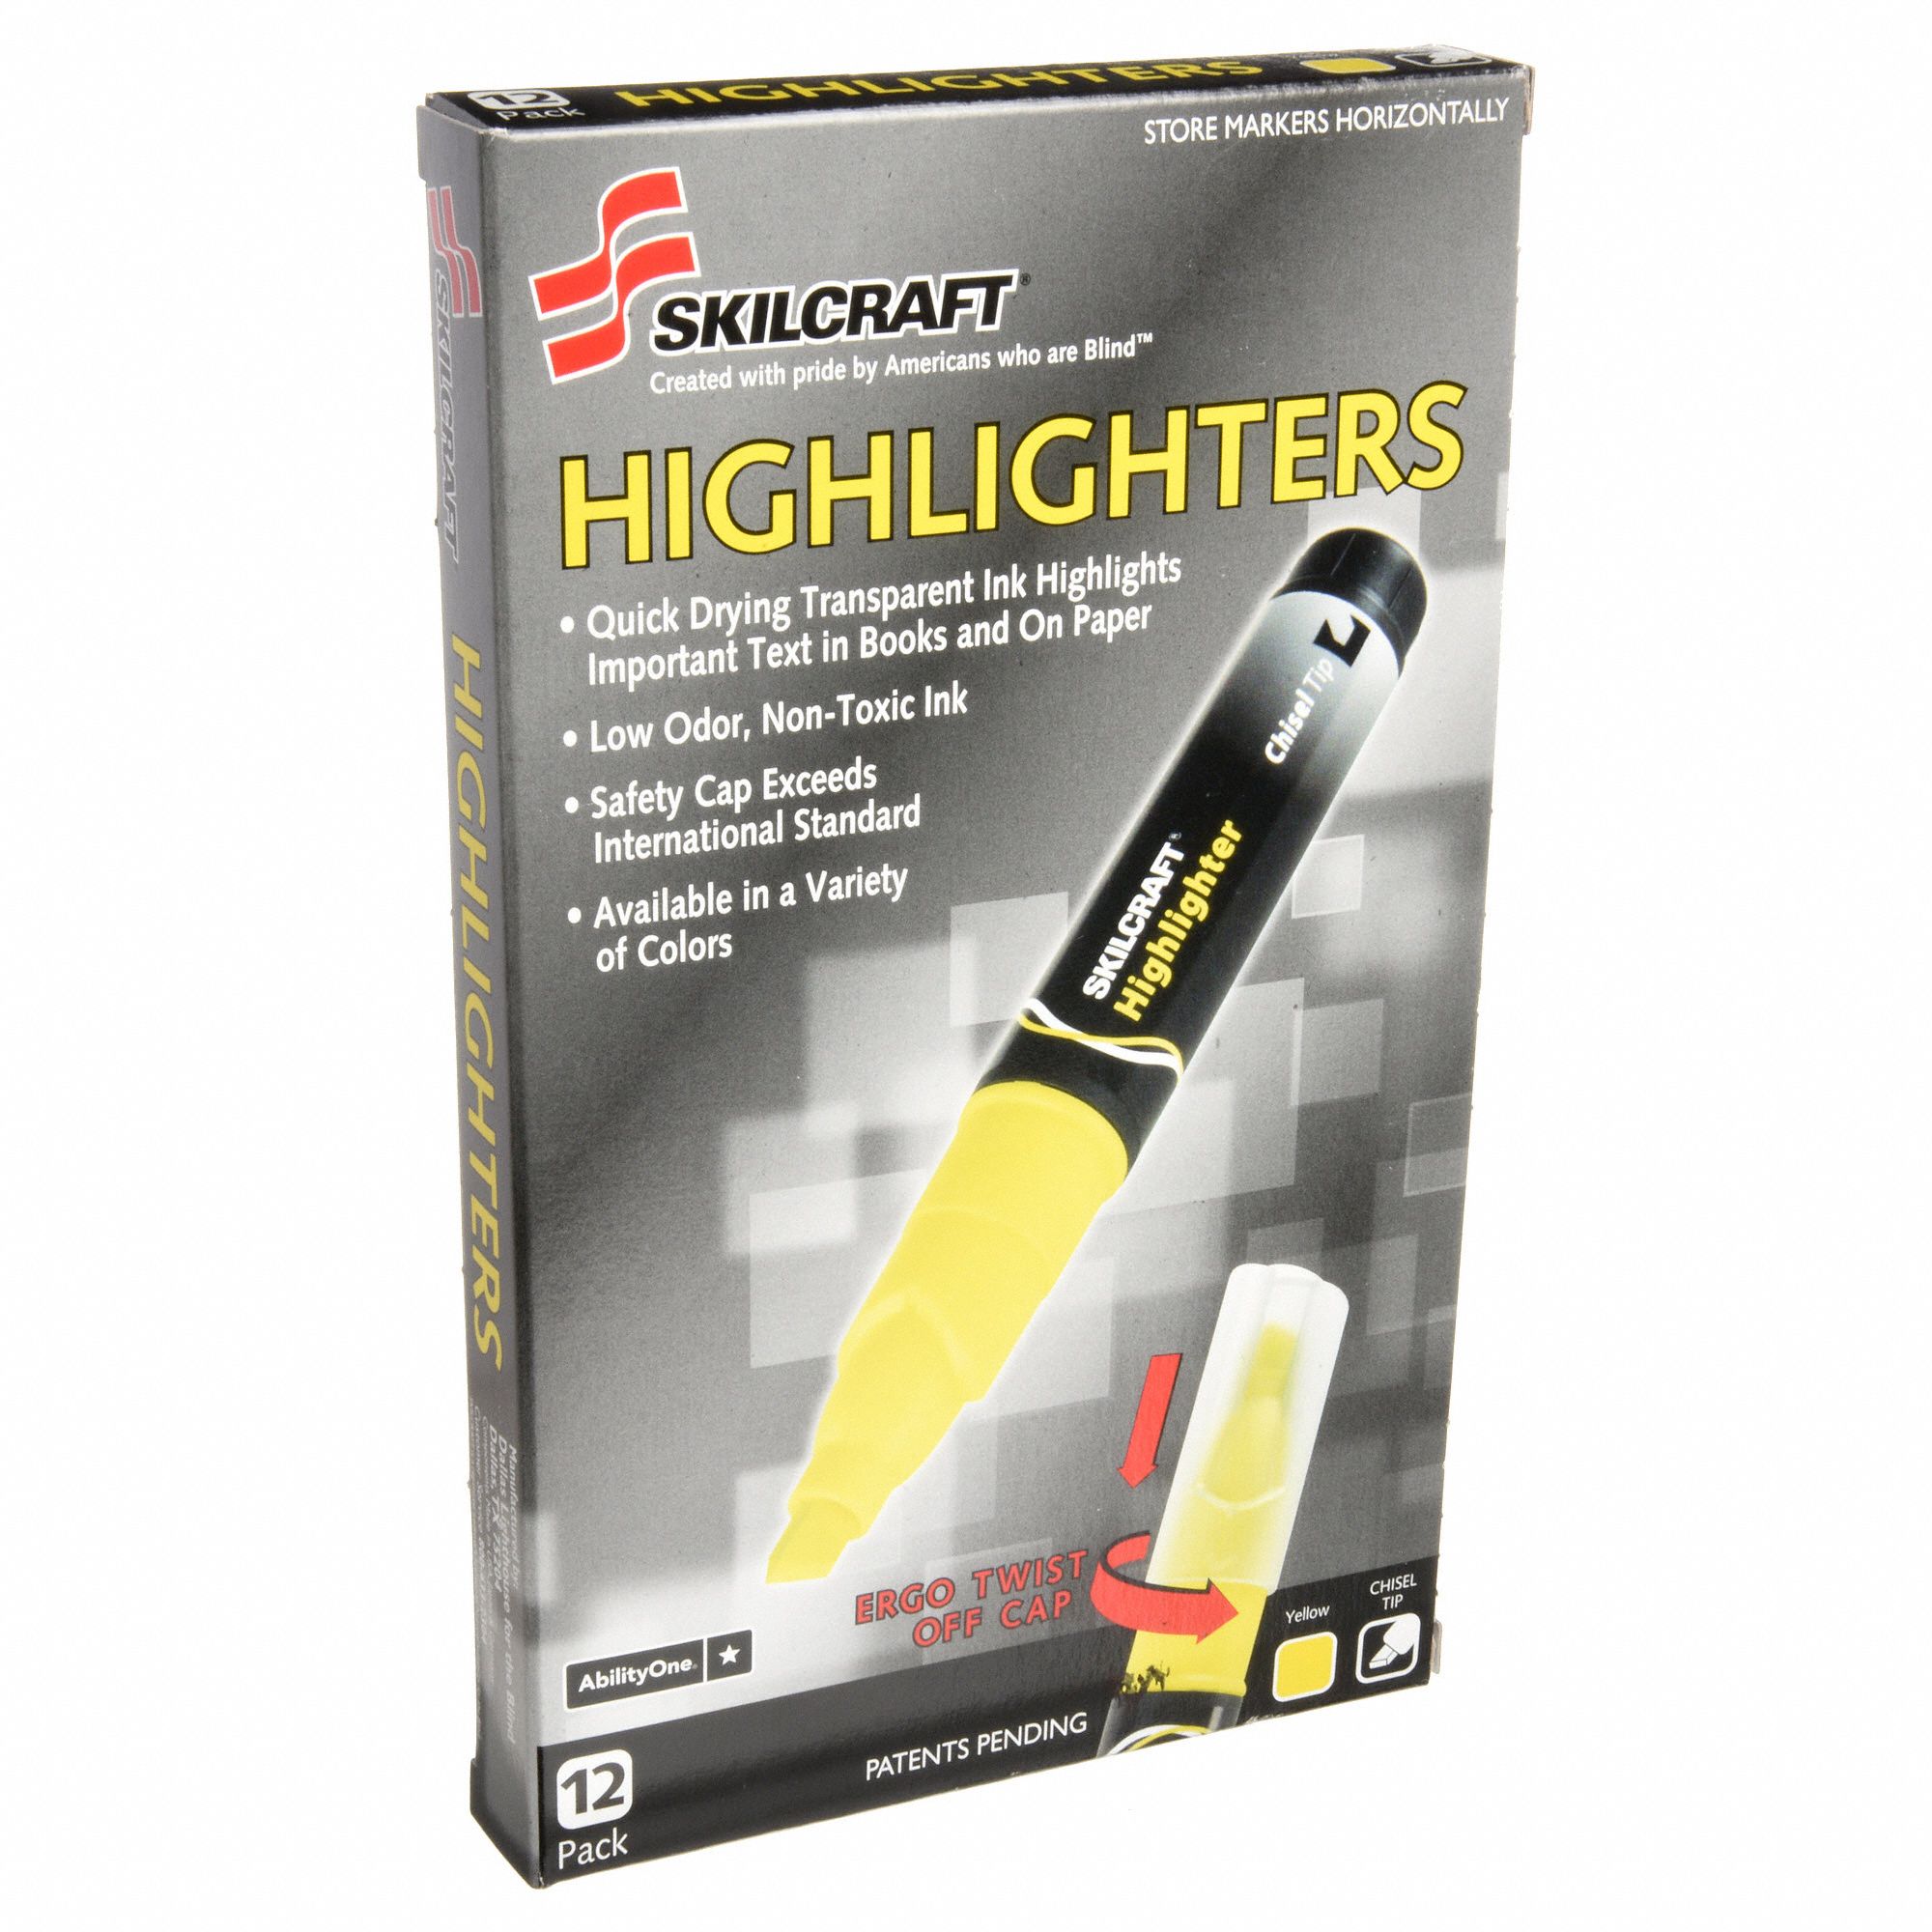 ABILITY ONE 7520-00-904-4476 Highlighter,Yellow,PK12